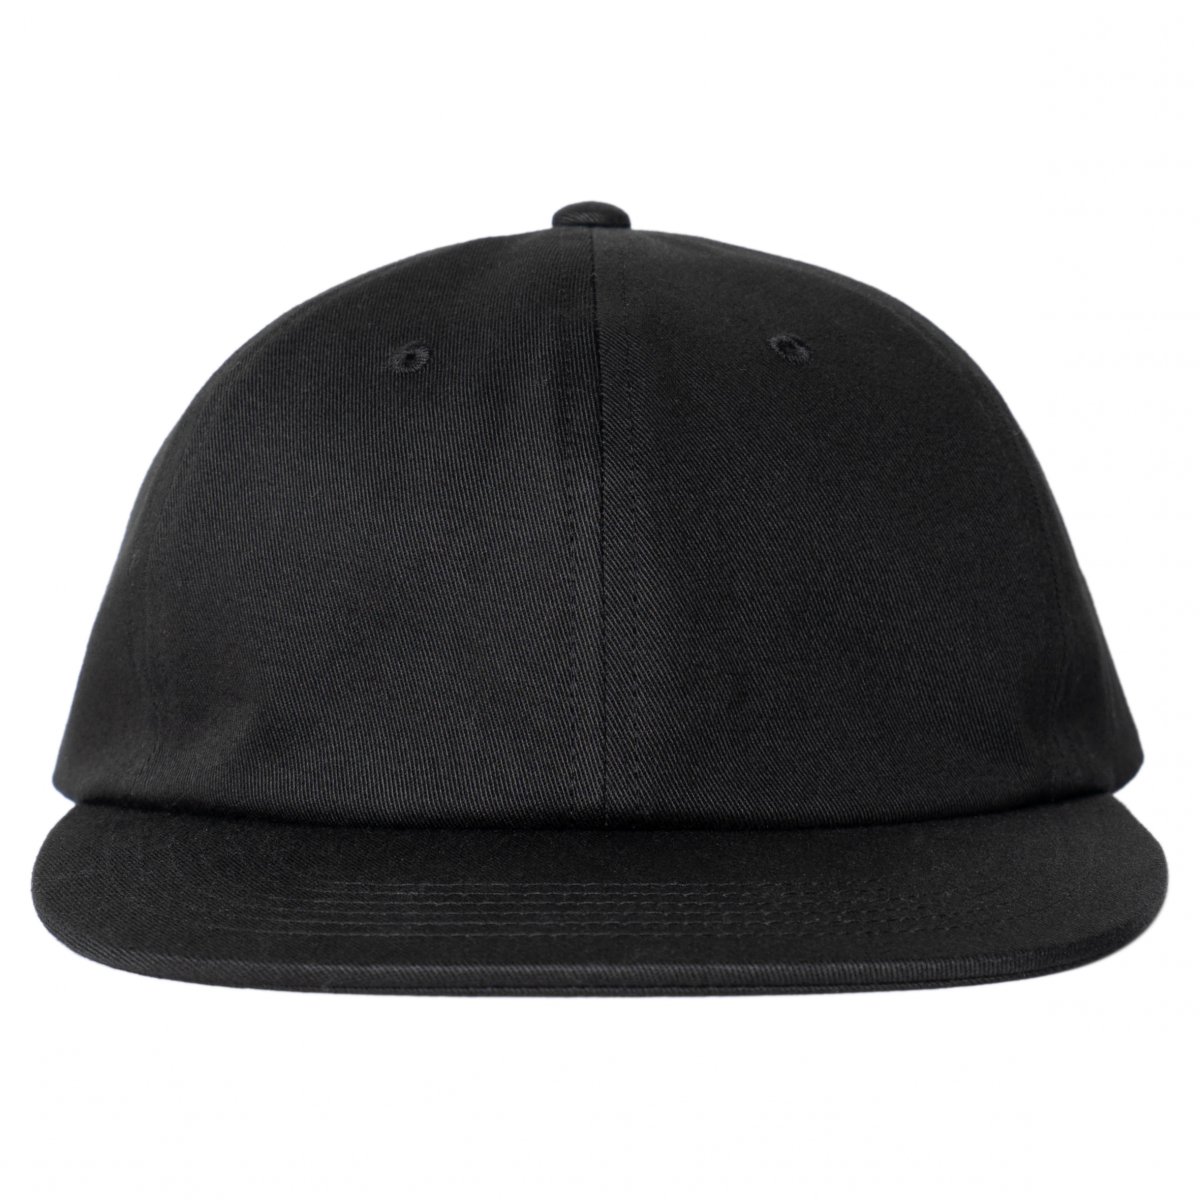 Cotton Twill 6 Panel - Black - CUP AND CONE WEB STORE